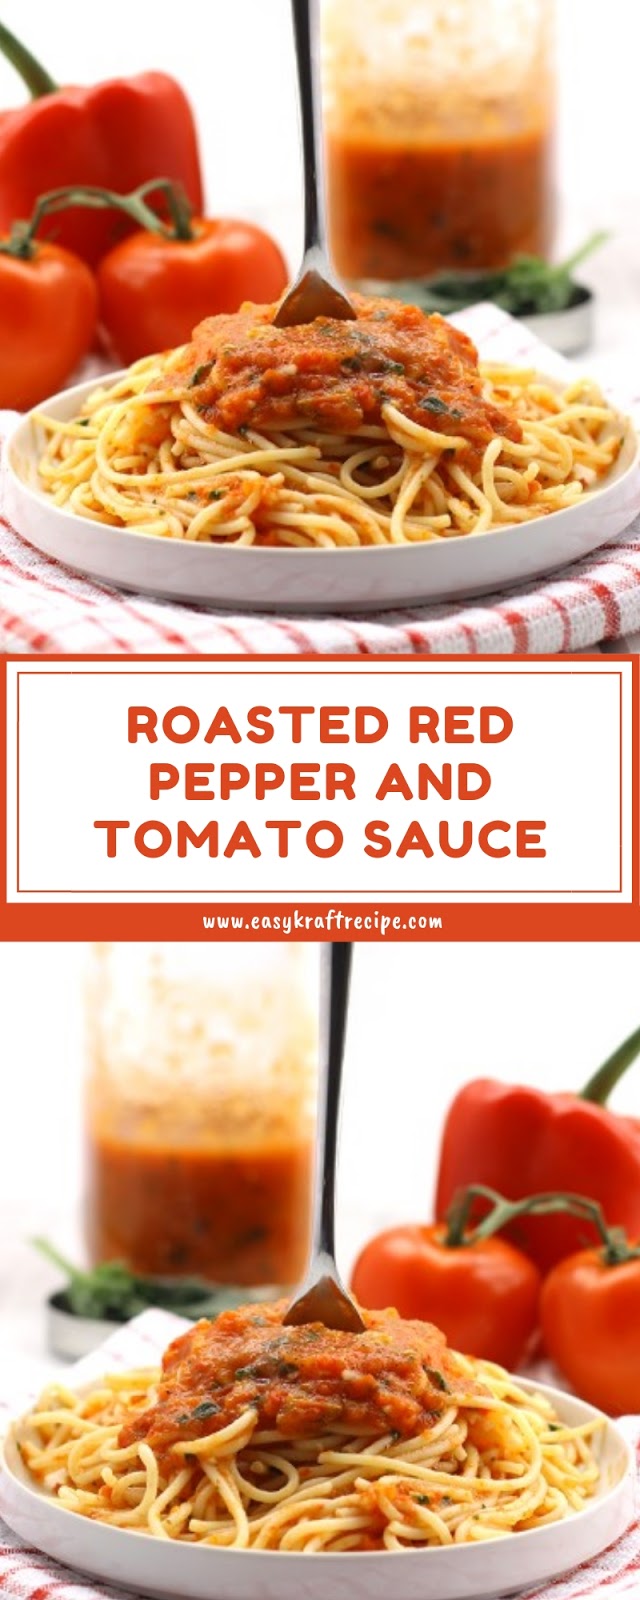 ROASTED RED PEPPER AND TOMATO SAUCE